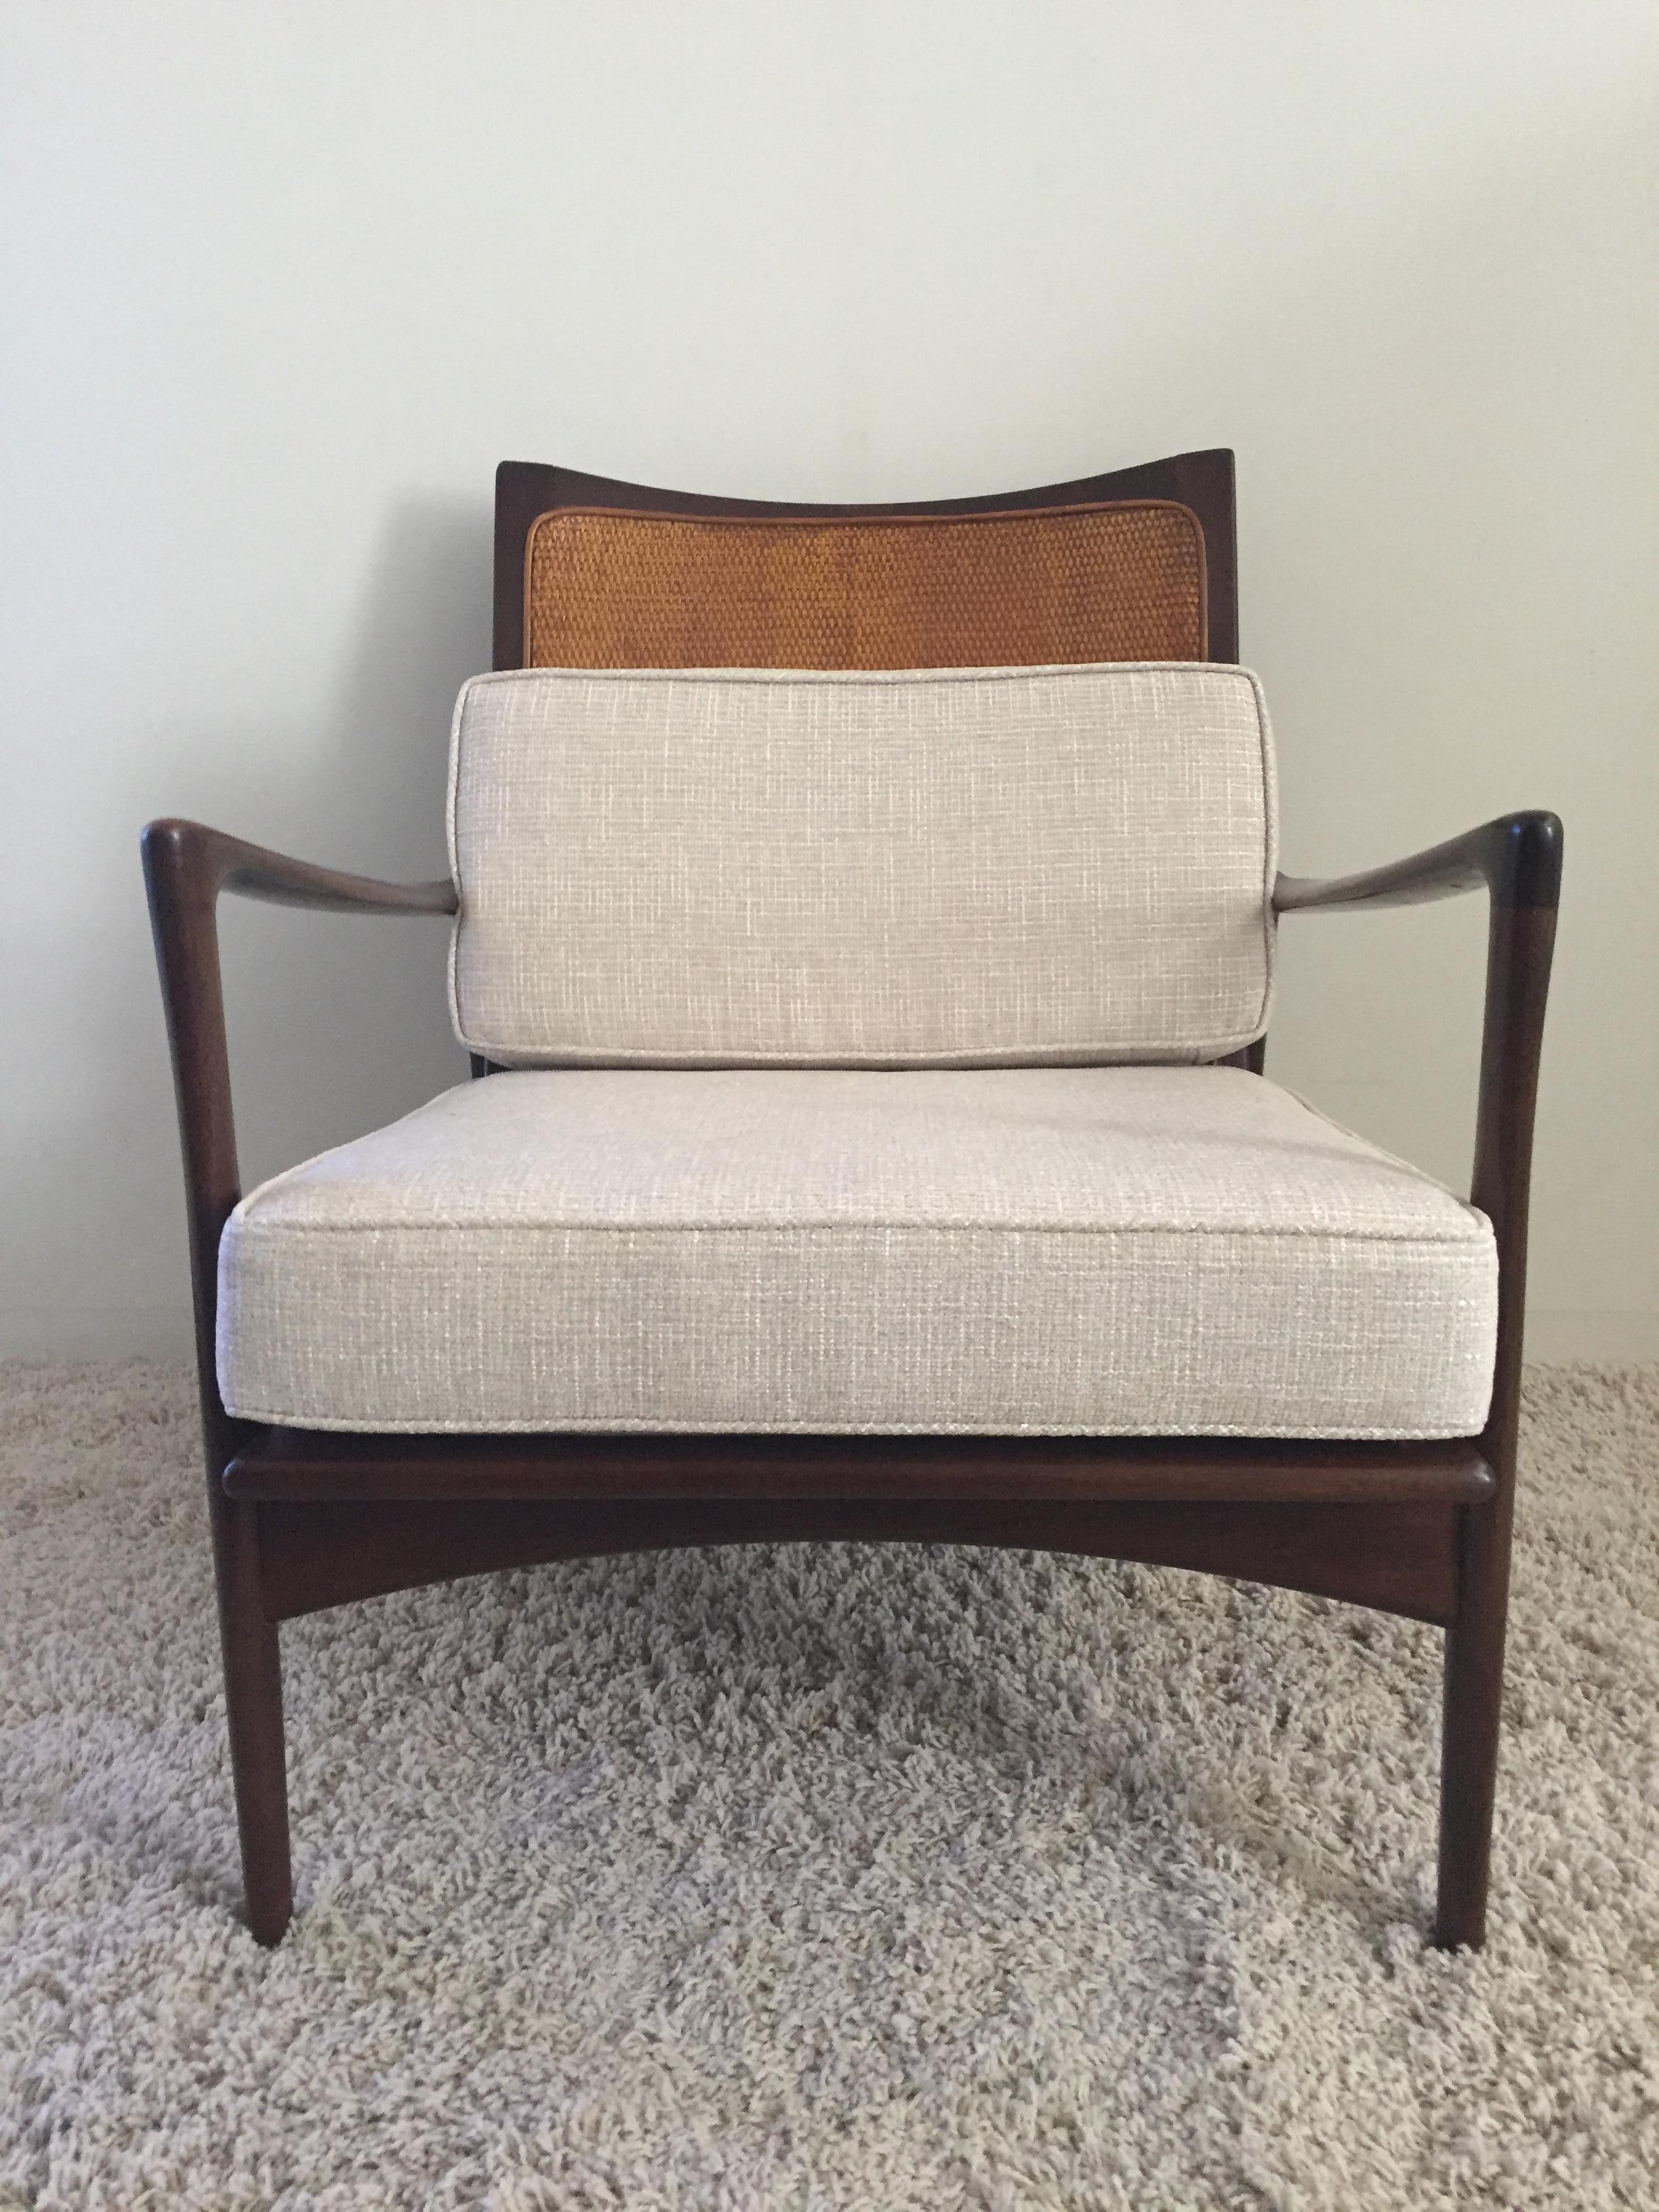 Ib Koford Larson cane back chair, caning in very good condition and finish, woven fabric chenille in wheat and cream color, rubber straps for comfort stamped, Denmark Selig Co. Design sleek.